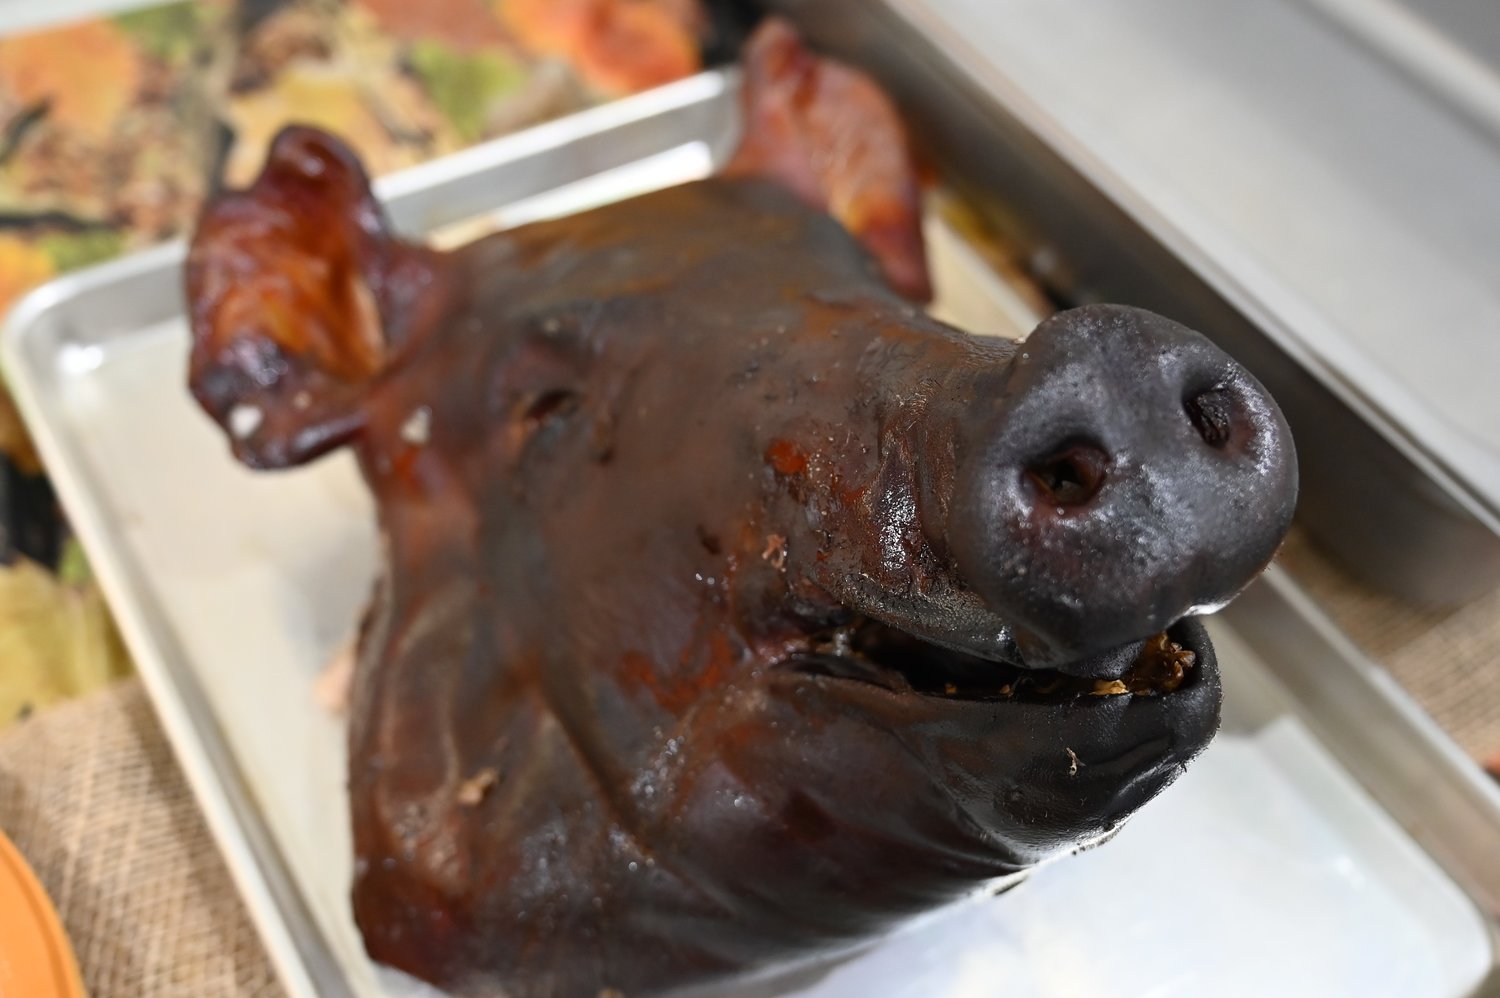 A pig's head was part of the decor at a wild game dinner in Omega, Ga., on Friday, February 3, 2023. (Index/Roger Alford)